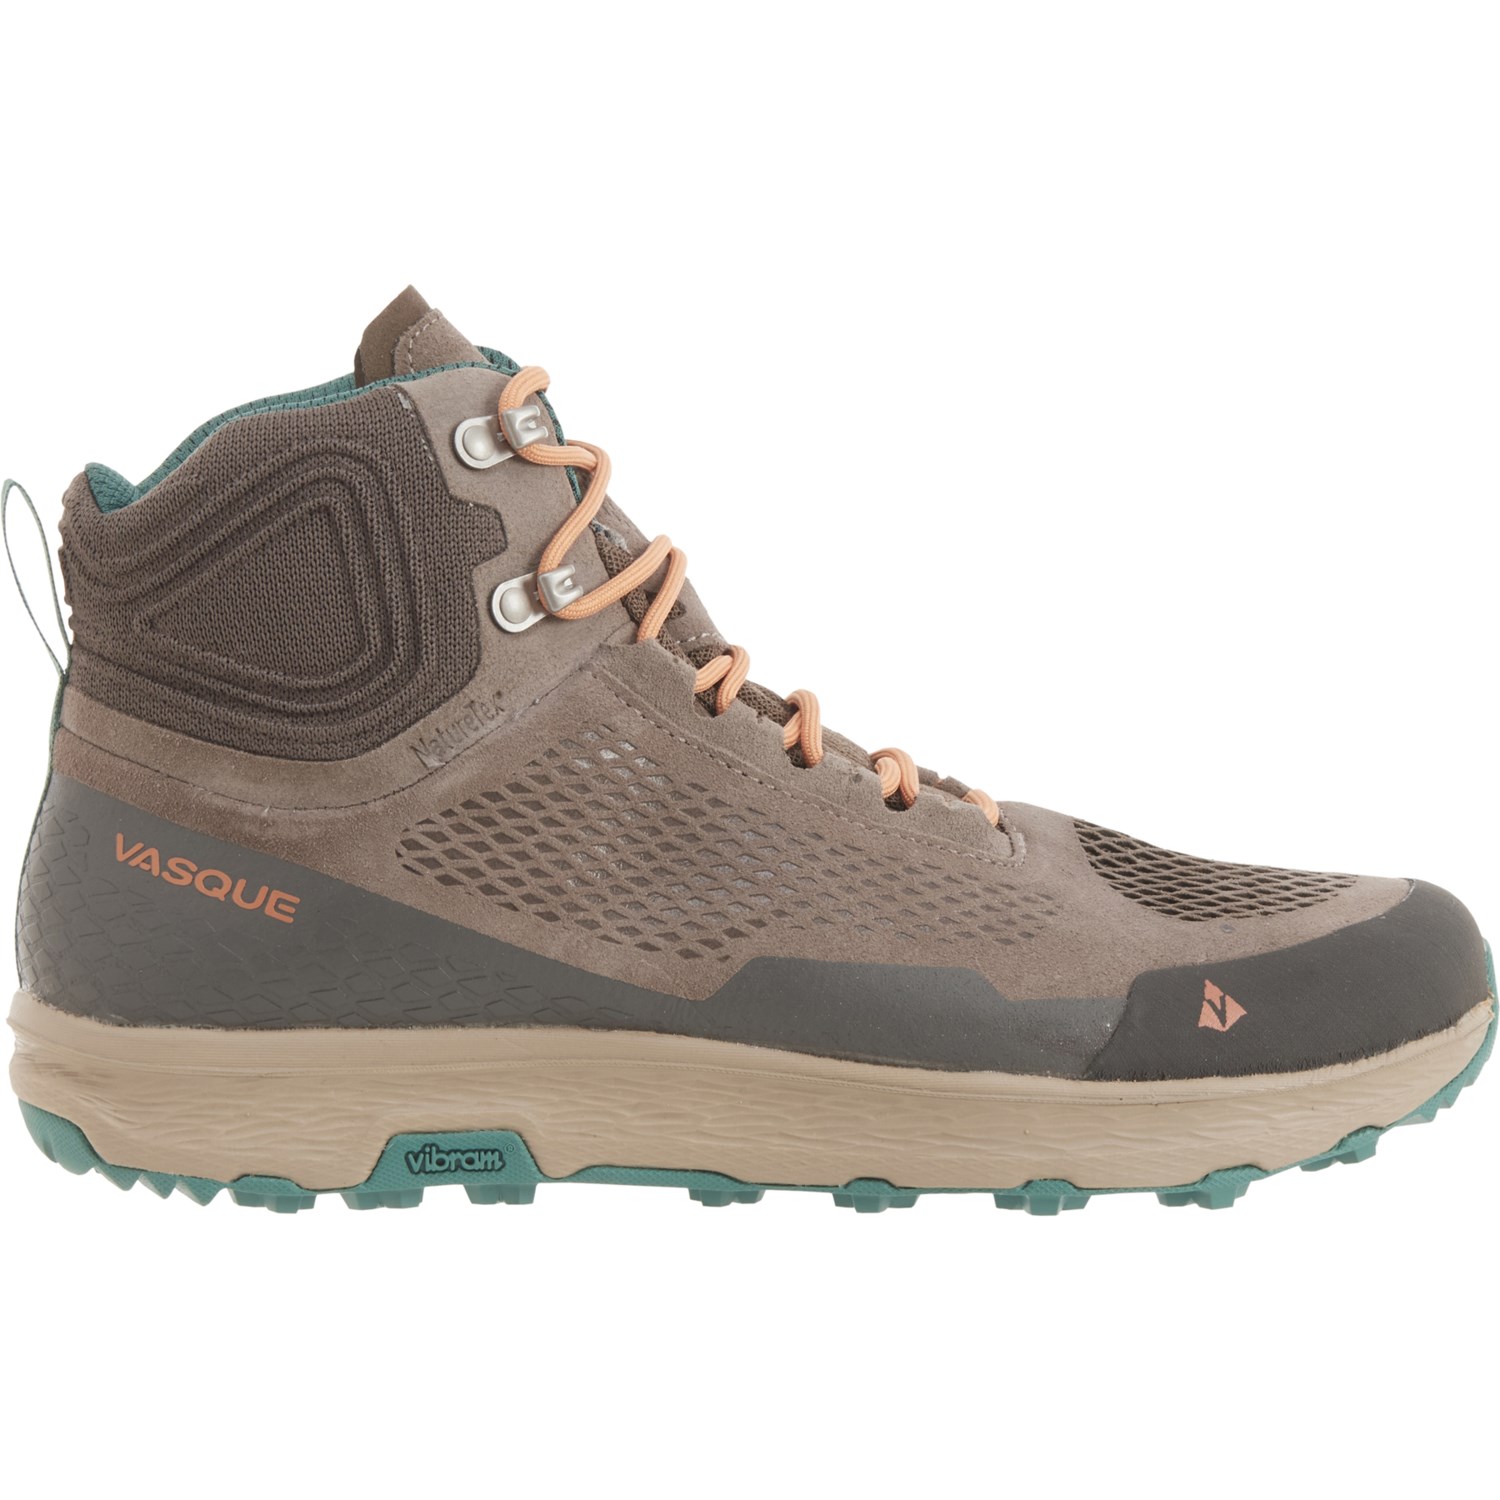 Vasque Breeze LT NTX Mid Hiking Boots (For Women) - Save 54%